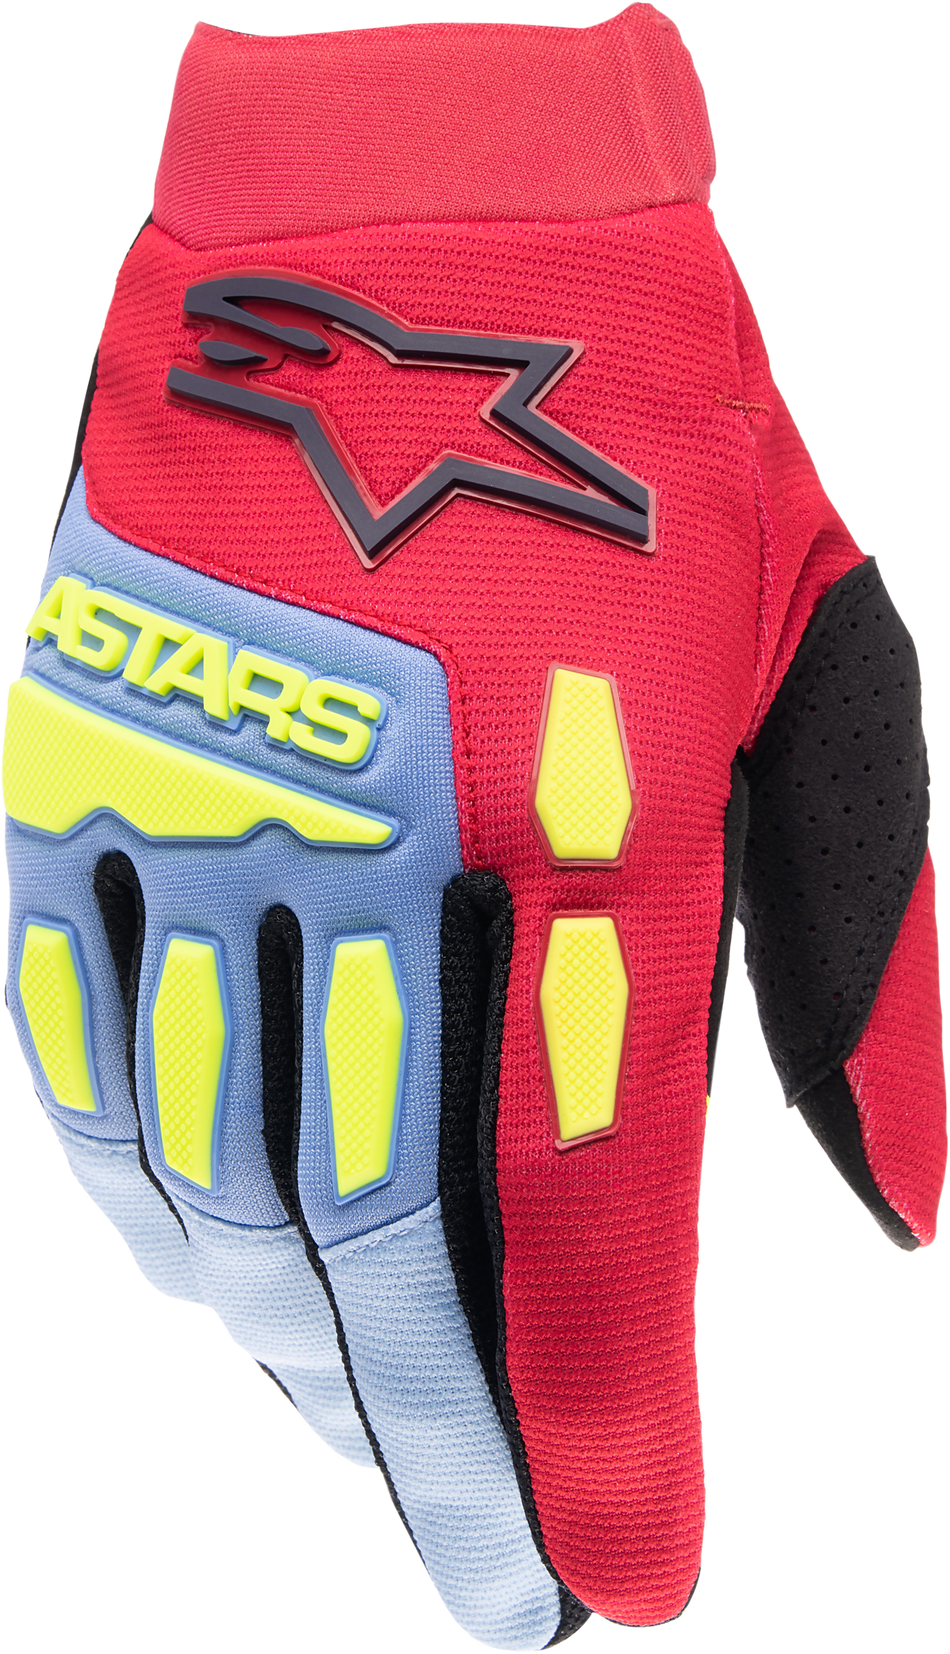 ALPINESTARS Youth & Kids Full Bore Gloves Light Blue/Red Berry/Blk Y3xs 3543622-7067-3XS